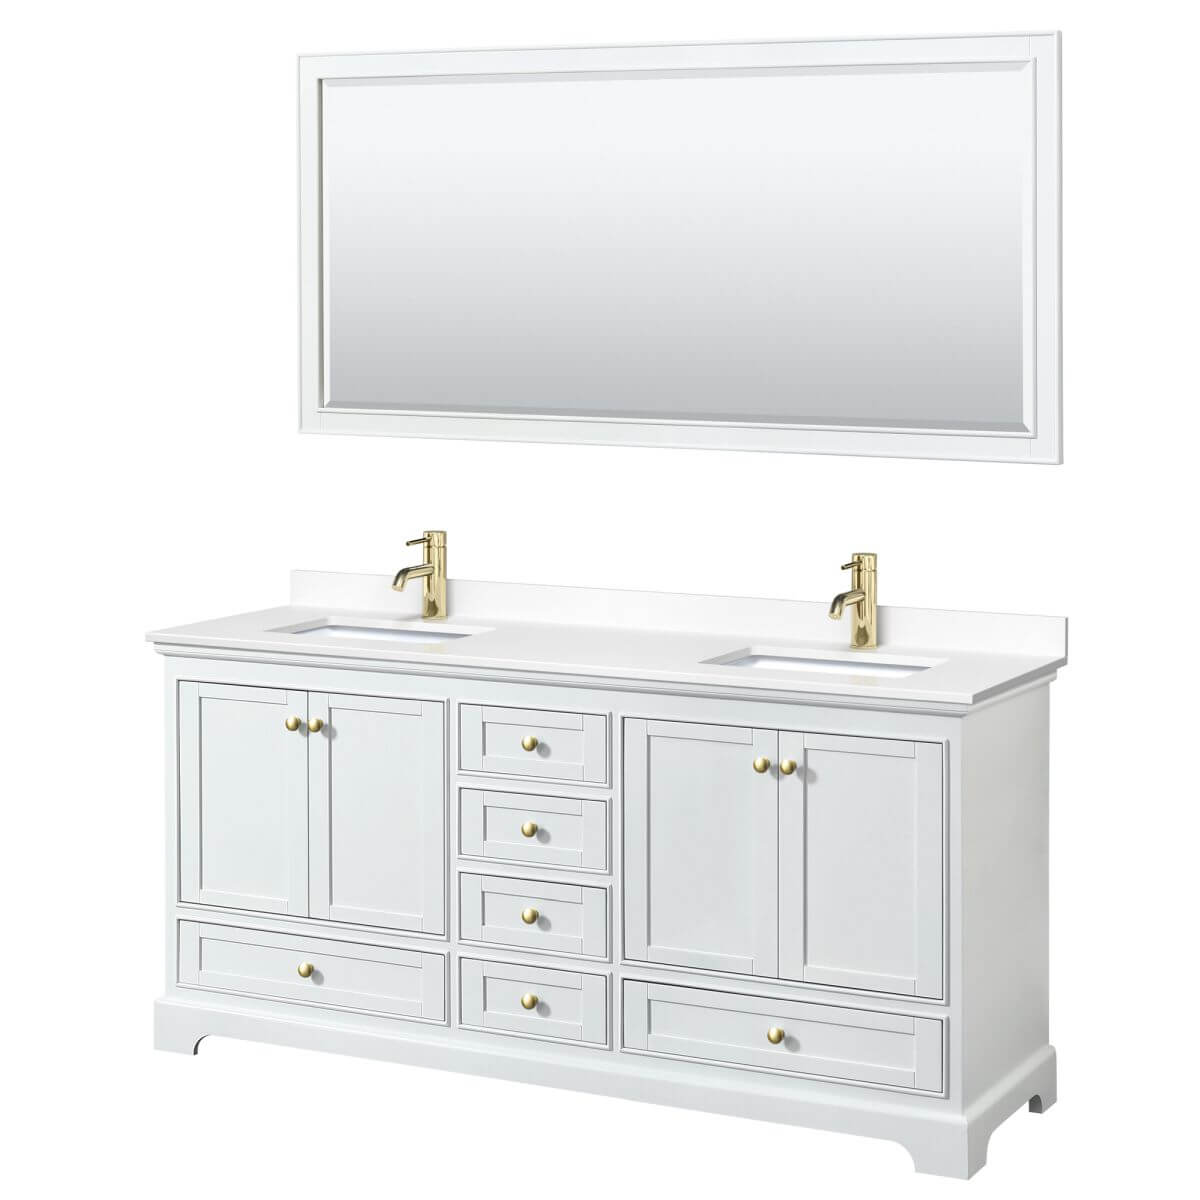 Wyndham Collection Deborah 72 inch Double Bathroom Vanity in White with White Cultured Marble Countertop, Undermount Square Sinks, Brushed Gold Trim and 70 inch Mirror - WCS202072DWGWCUNSM70